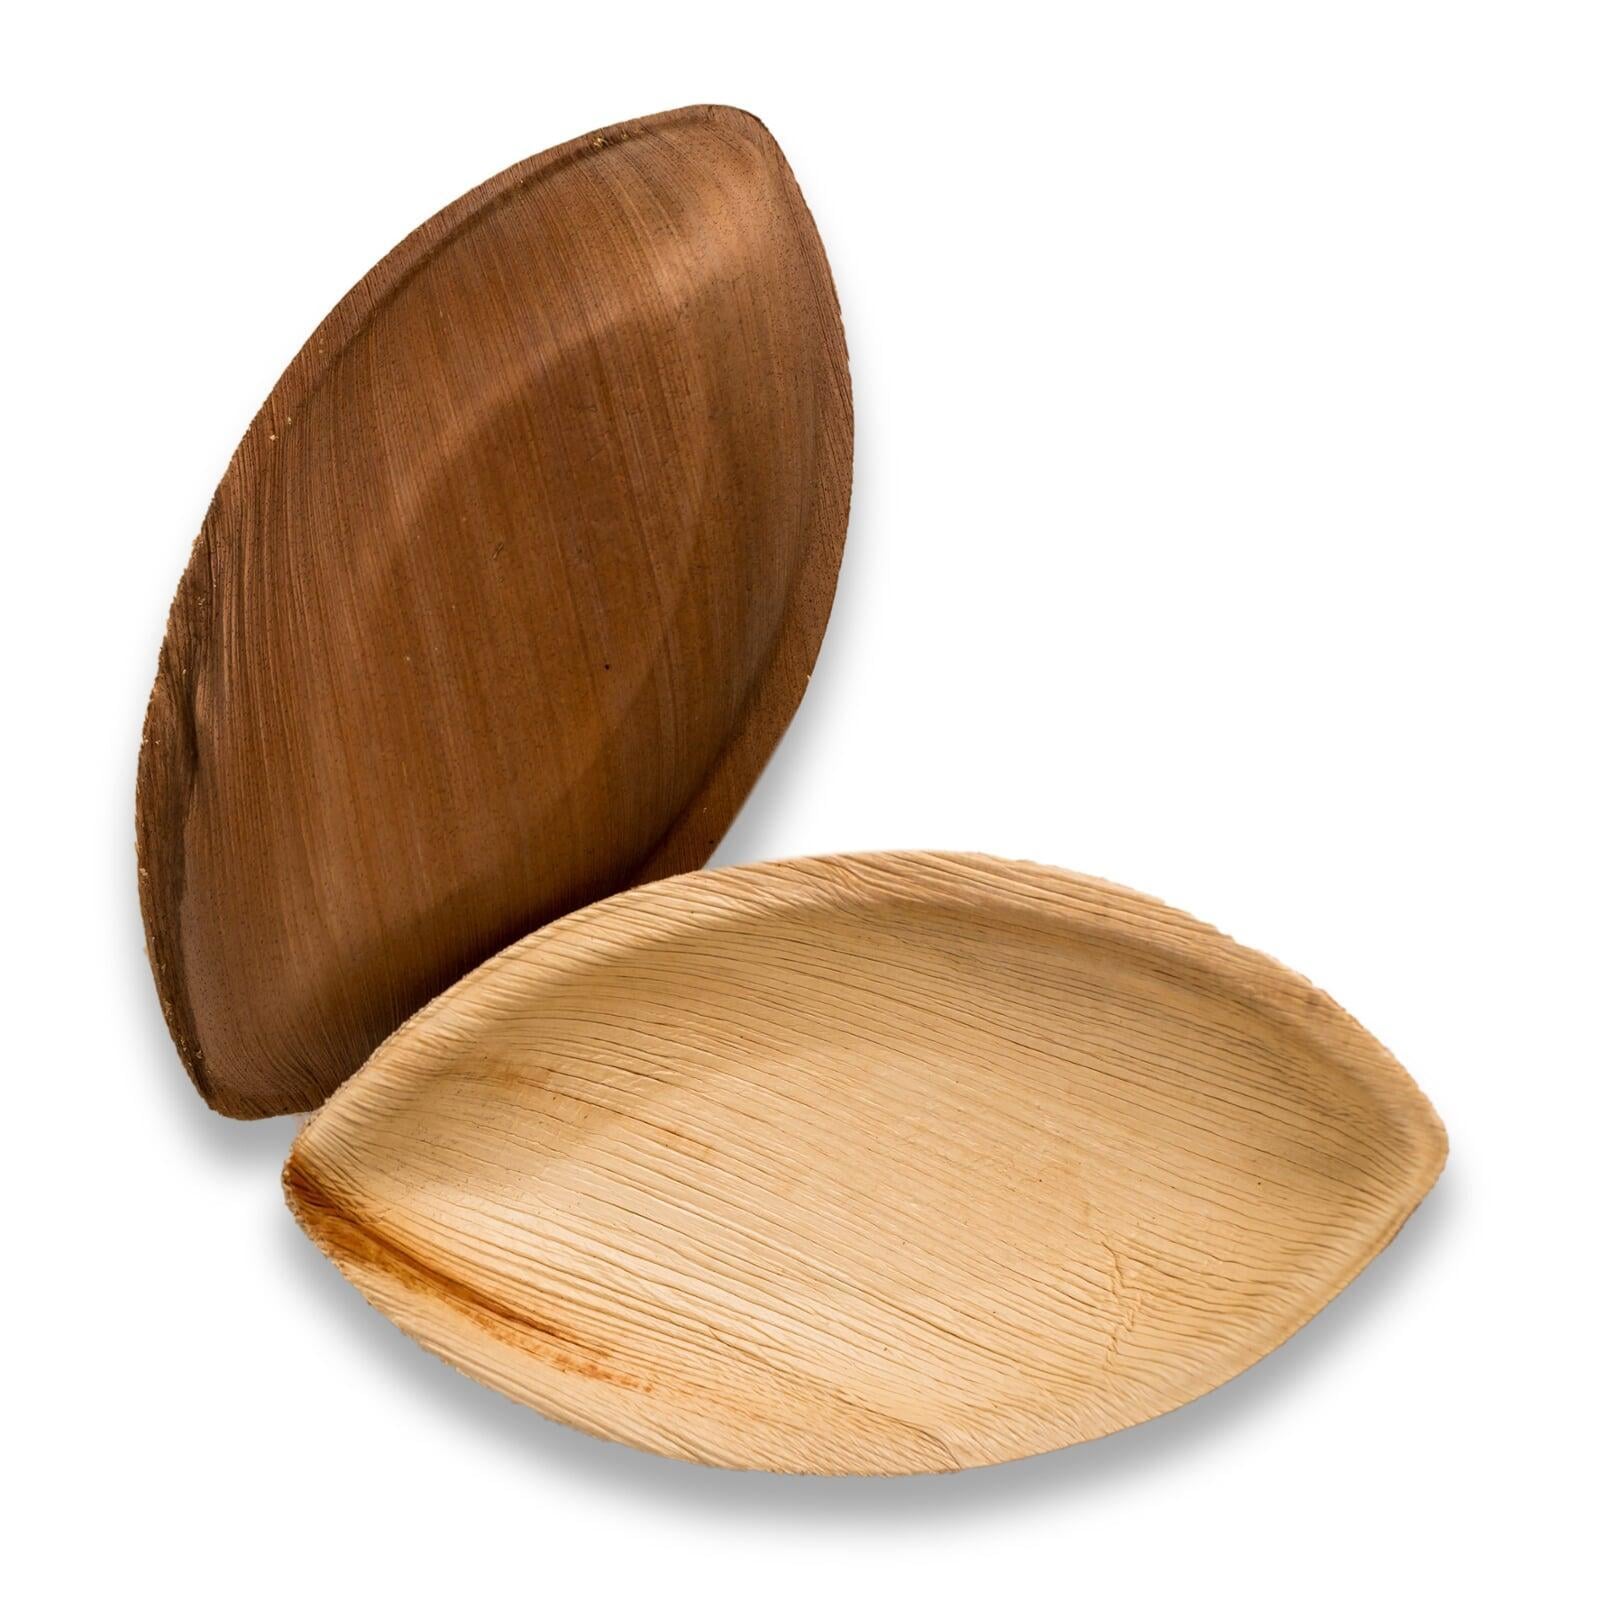 Check out Adaaya's boat-shaped tableware to add some oomph to your dining table!